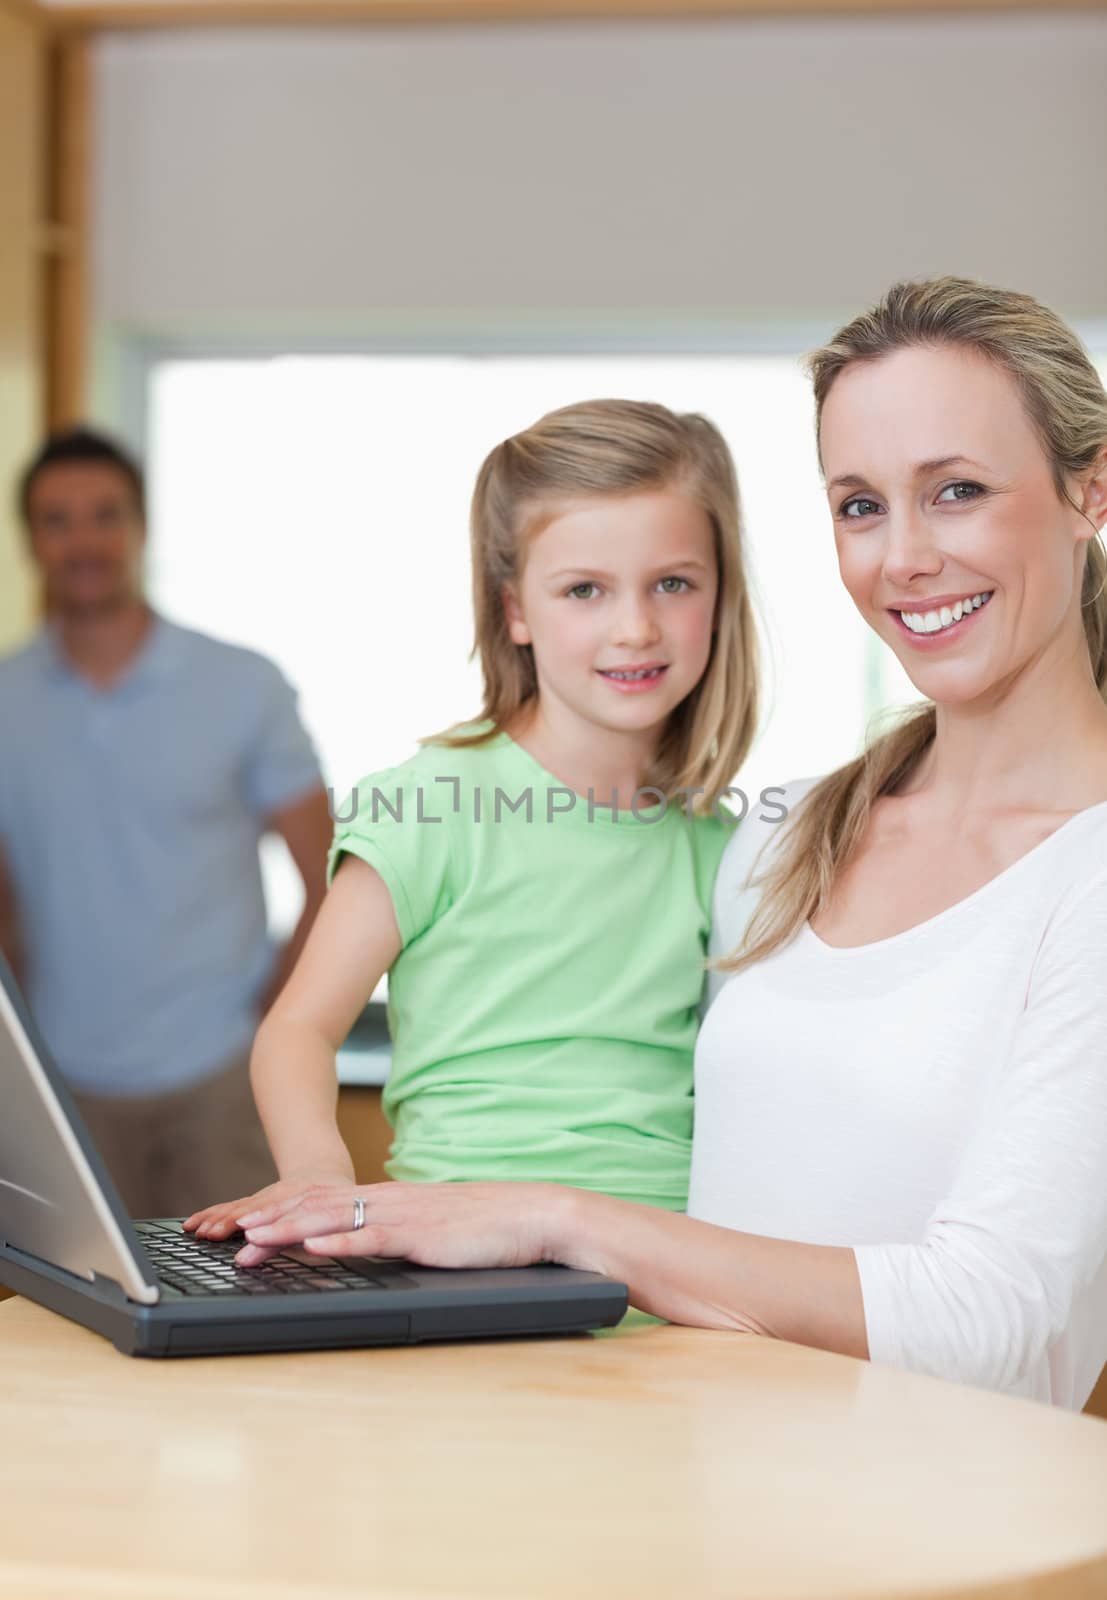 Mother and daughter using notebook together with father in the background